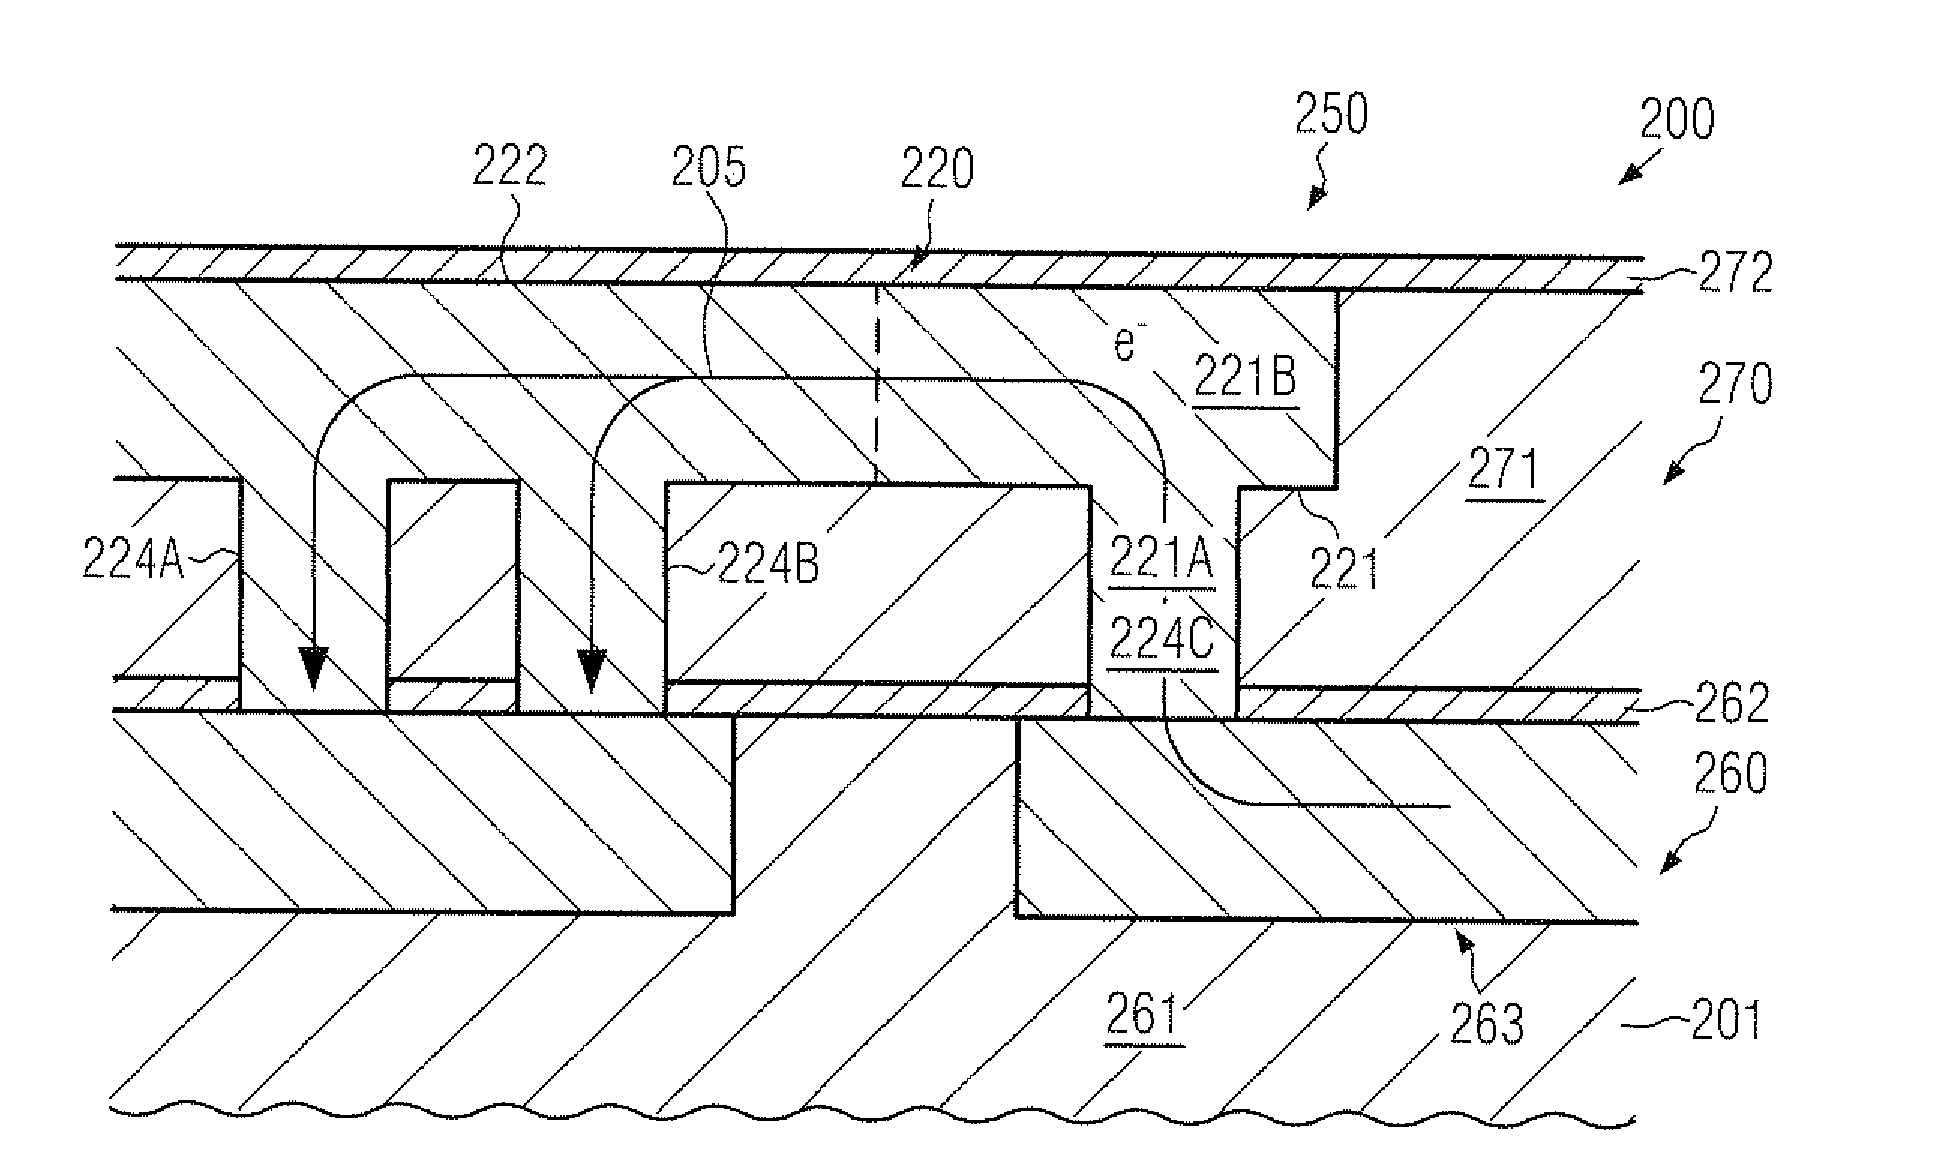 SEMICONDUCTOR DEVICE COMPRISING METAL-BASED eFUSES OF ENHANCED PROGRAMMING EFFICIENCY BY ENHANCING METAL AGGLOMERATION AND/OR VOIDING